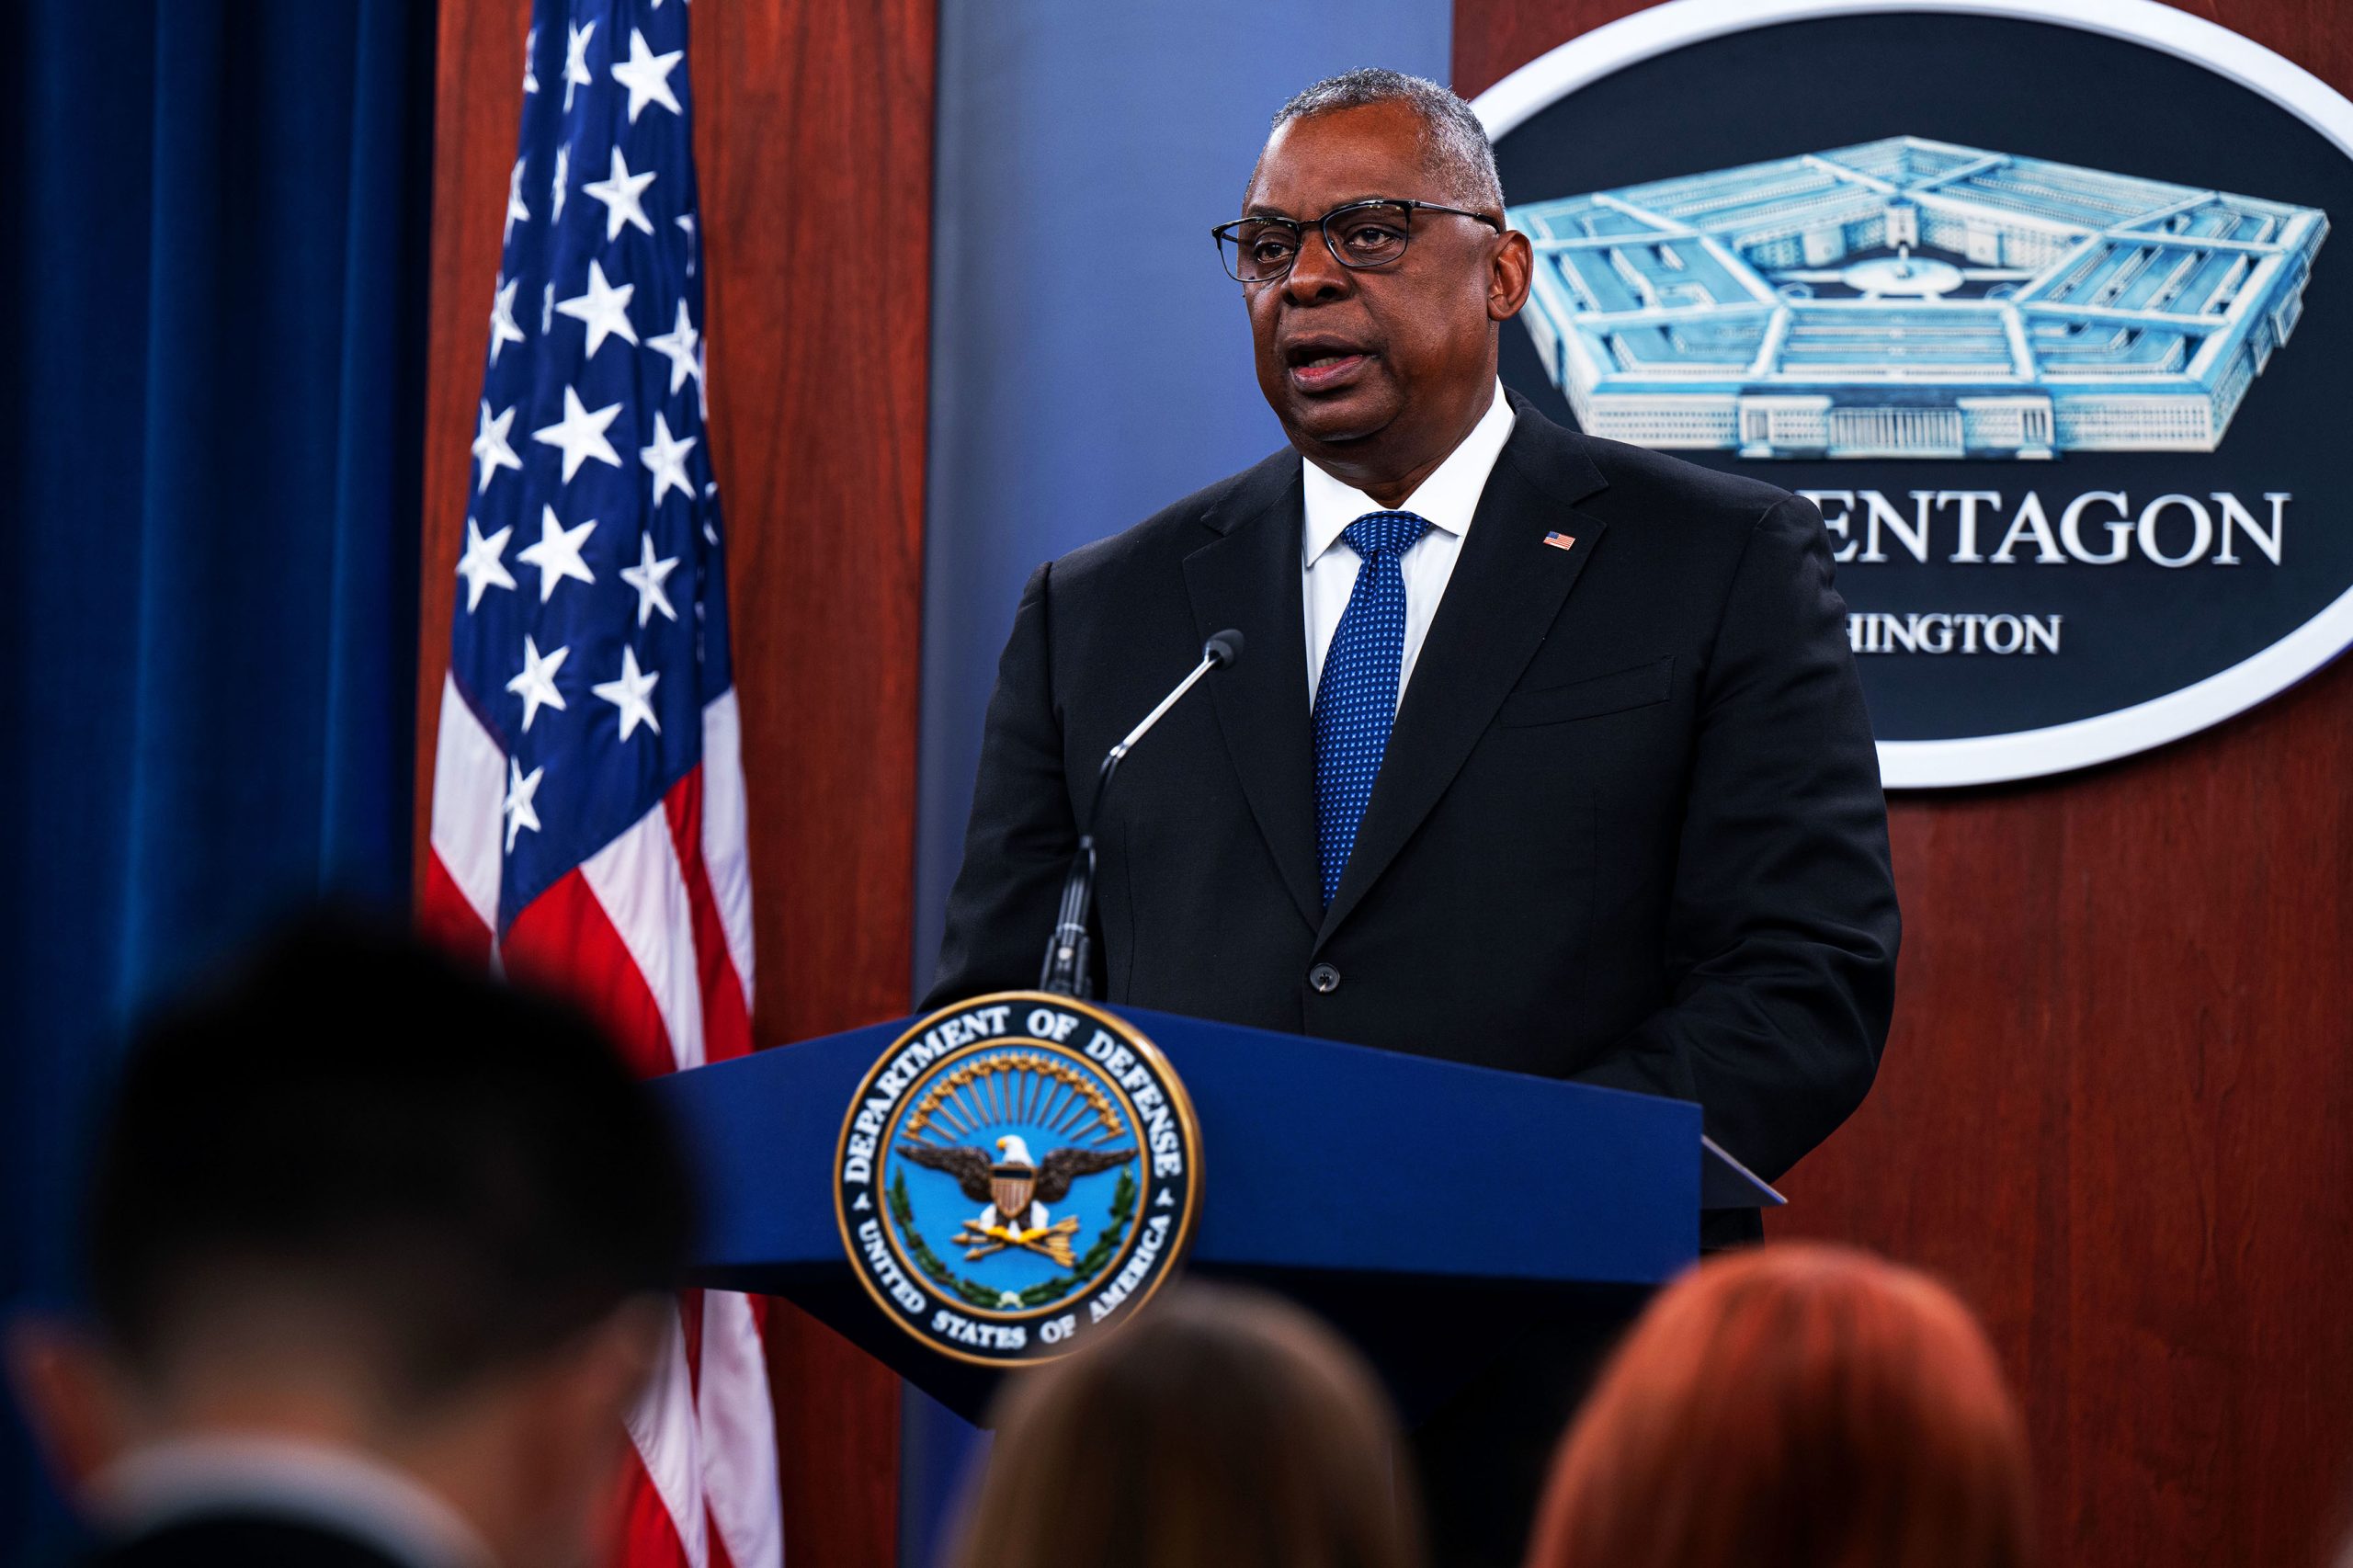 U.S. national defense strategy commits to deter malicious force in Indo-Pacific